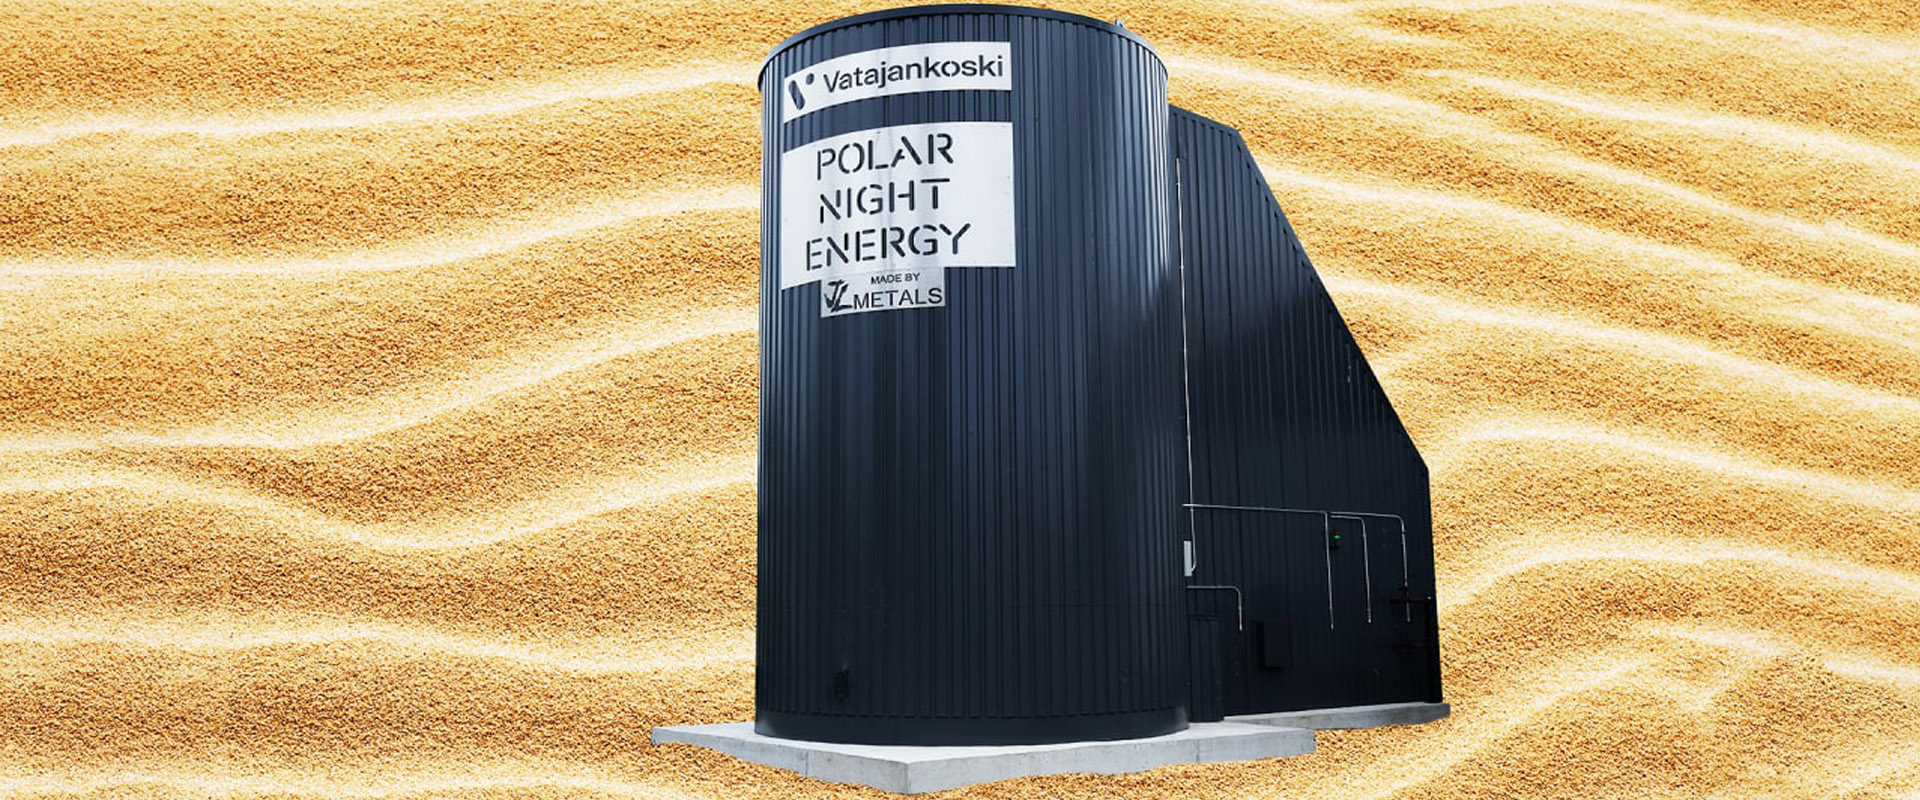 World’s First Large-scale Sand Battery Goes Online in Finland